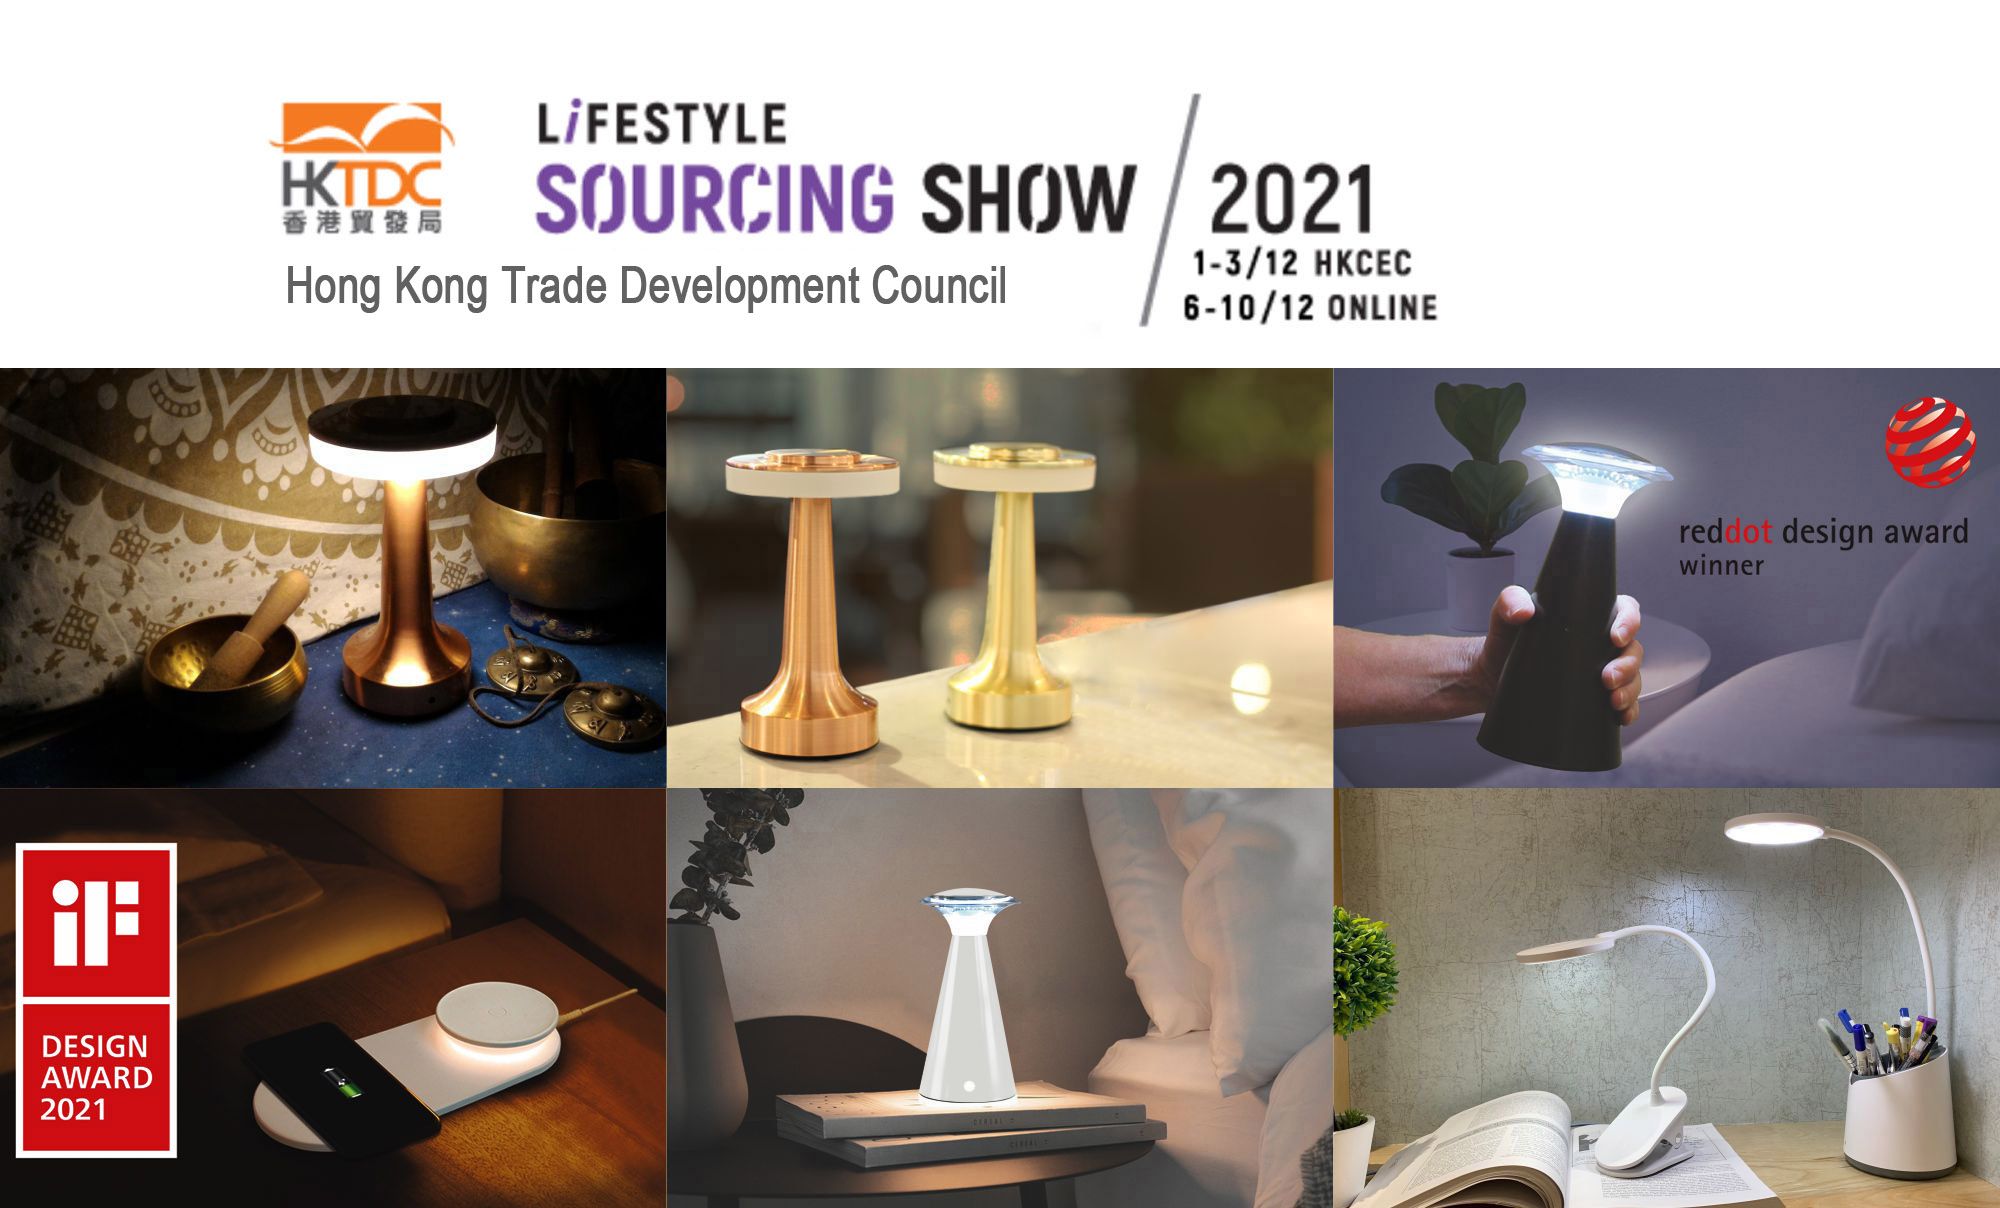 2021 Online Hong Kong Lifestyle Sourcing Show - . Lifestyle Sourcing Show